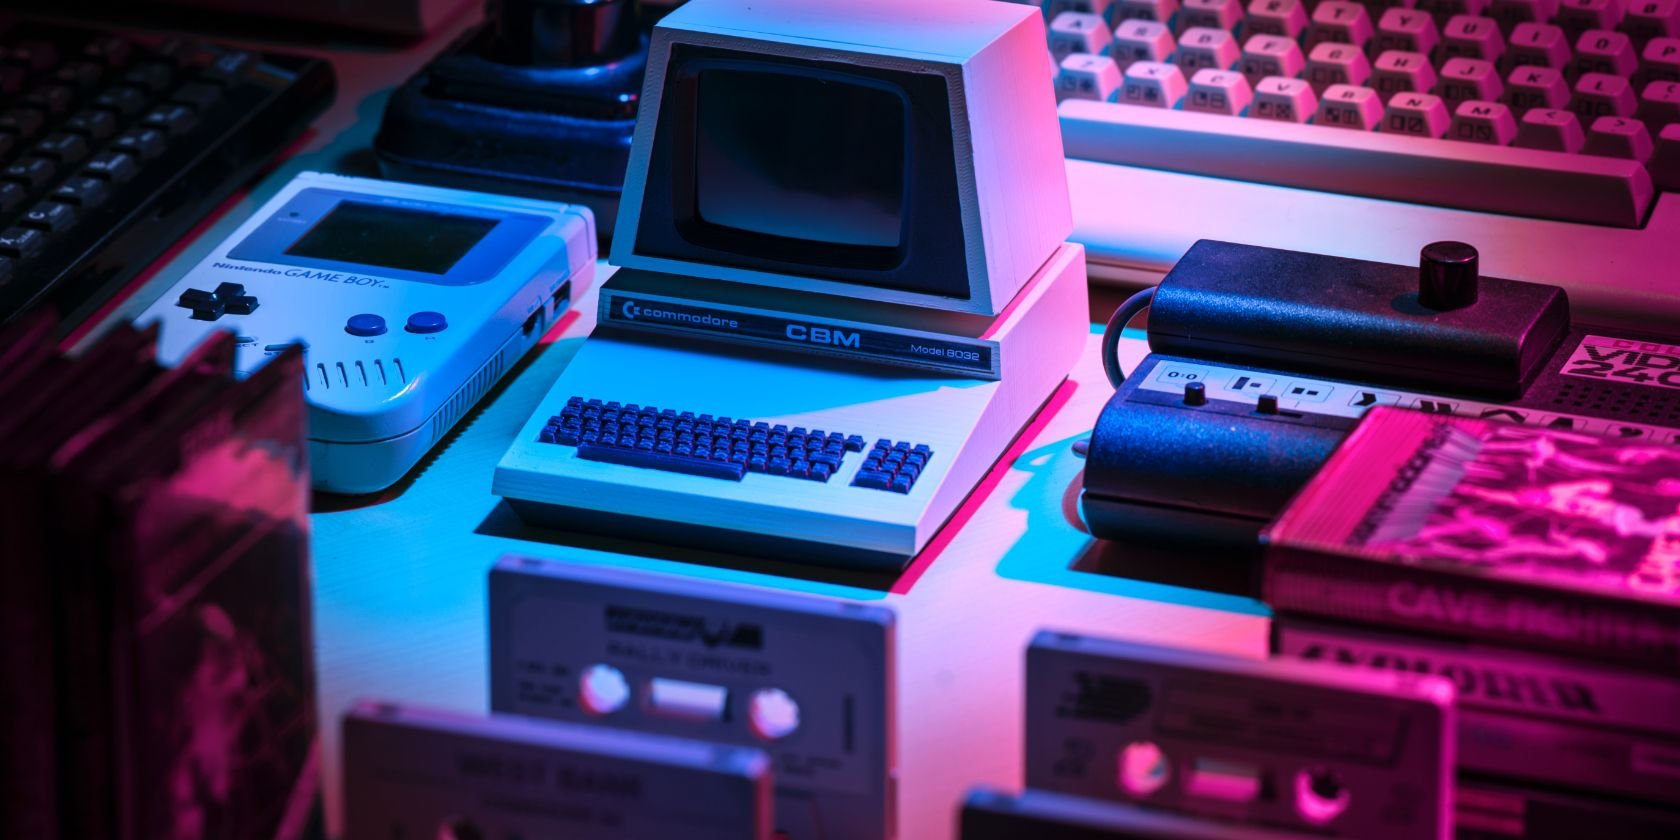 8 Gadgets and Devices We’d Travel Back in Time For